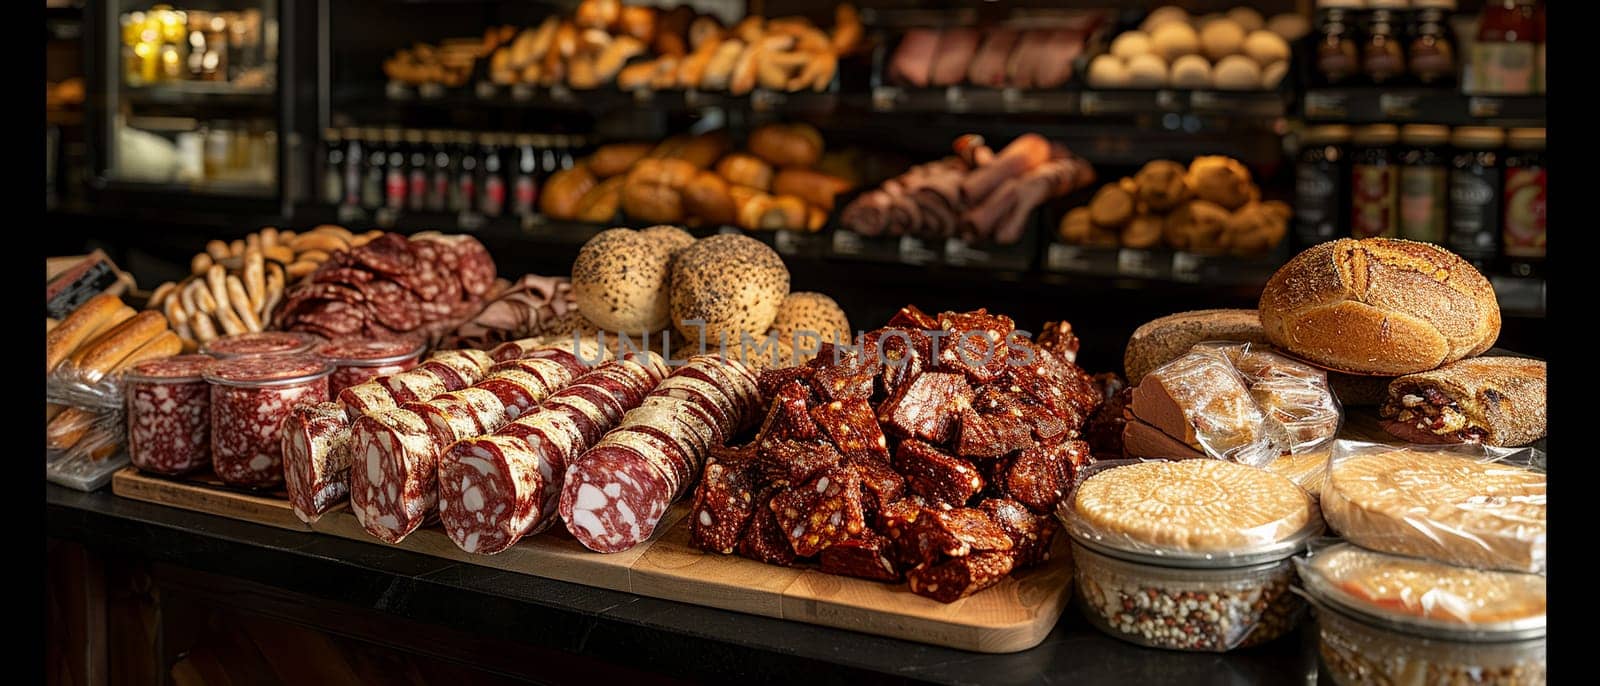 Delicatessen Showcases Specialty Selections in Business of Gourmet Delights, Deli counters and specialty meats showcase a narrative of specialty selections and gourmet delights in the delicatessen business.